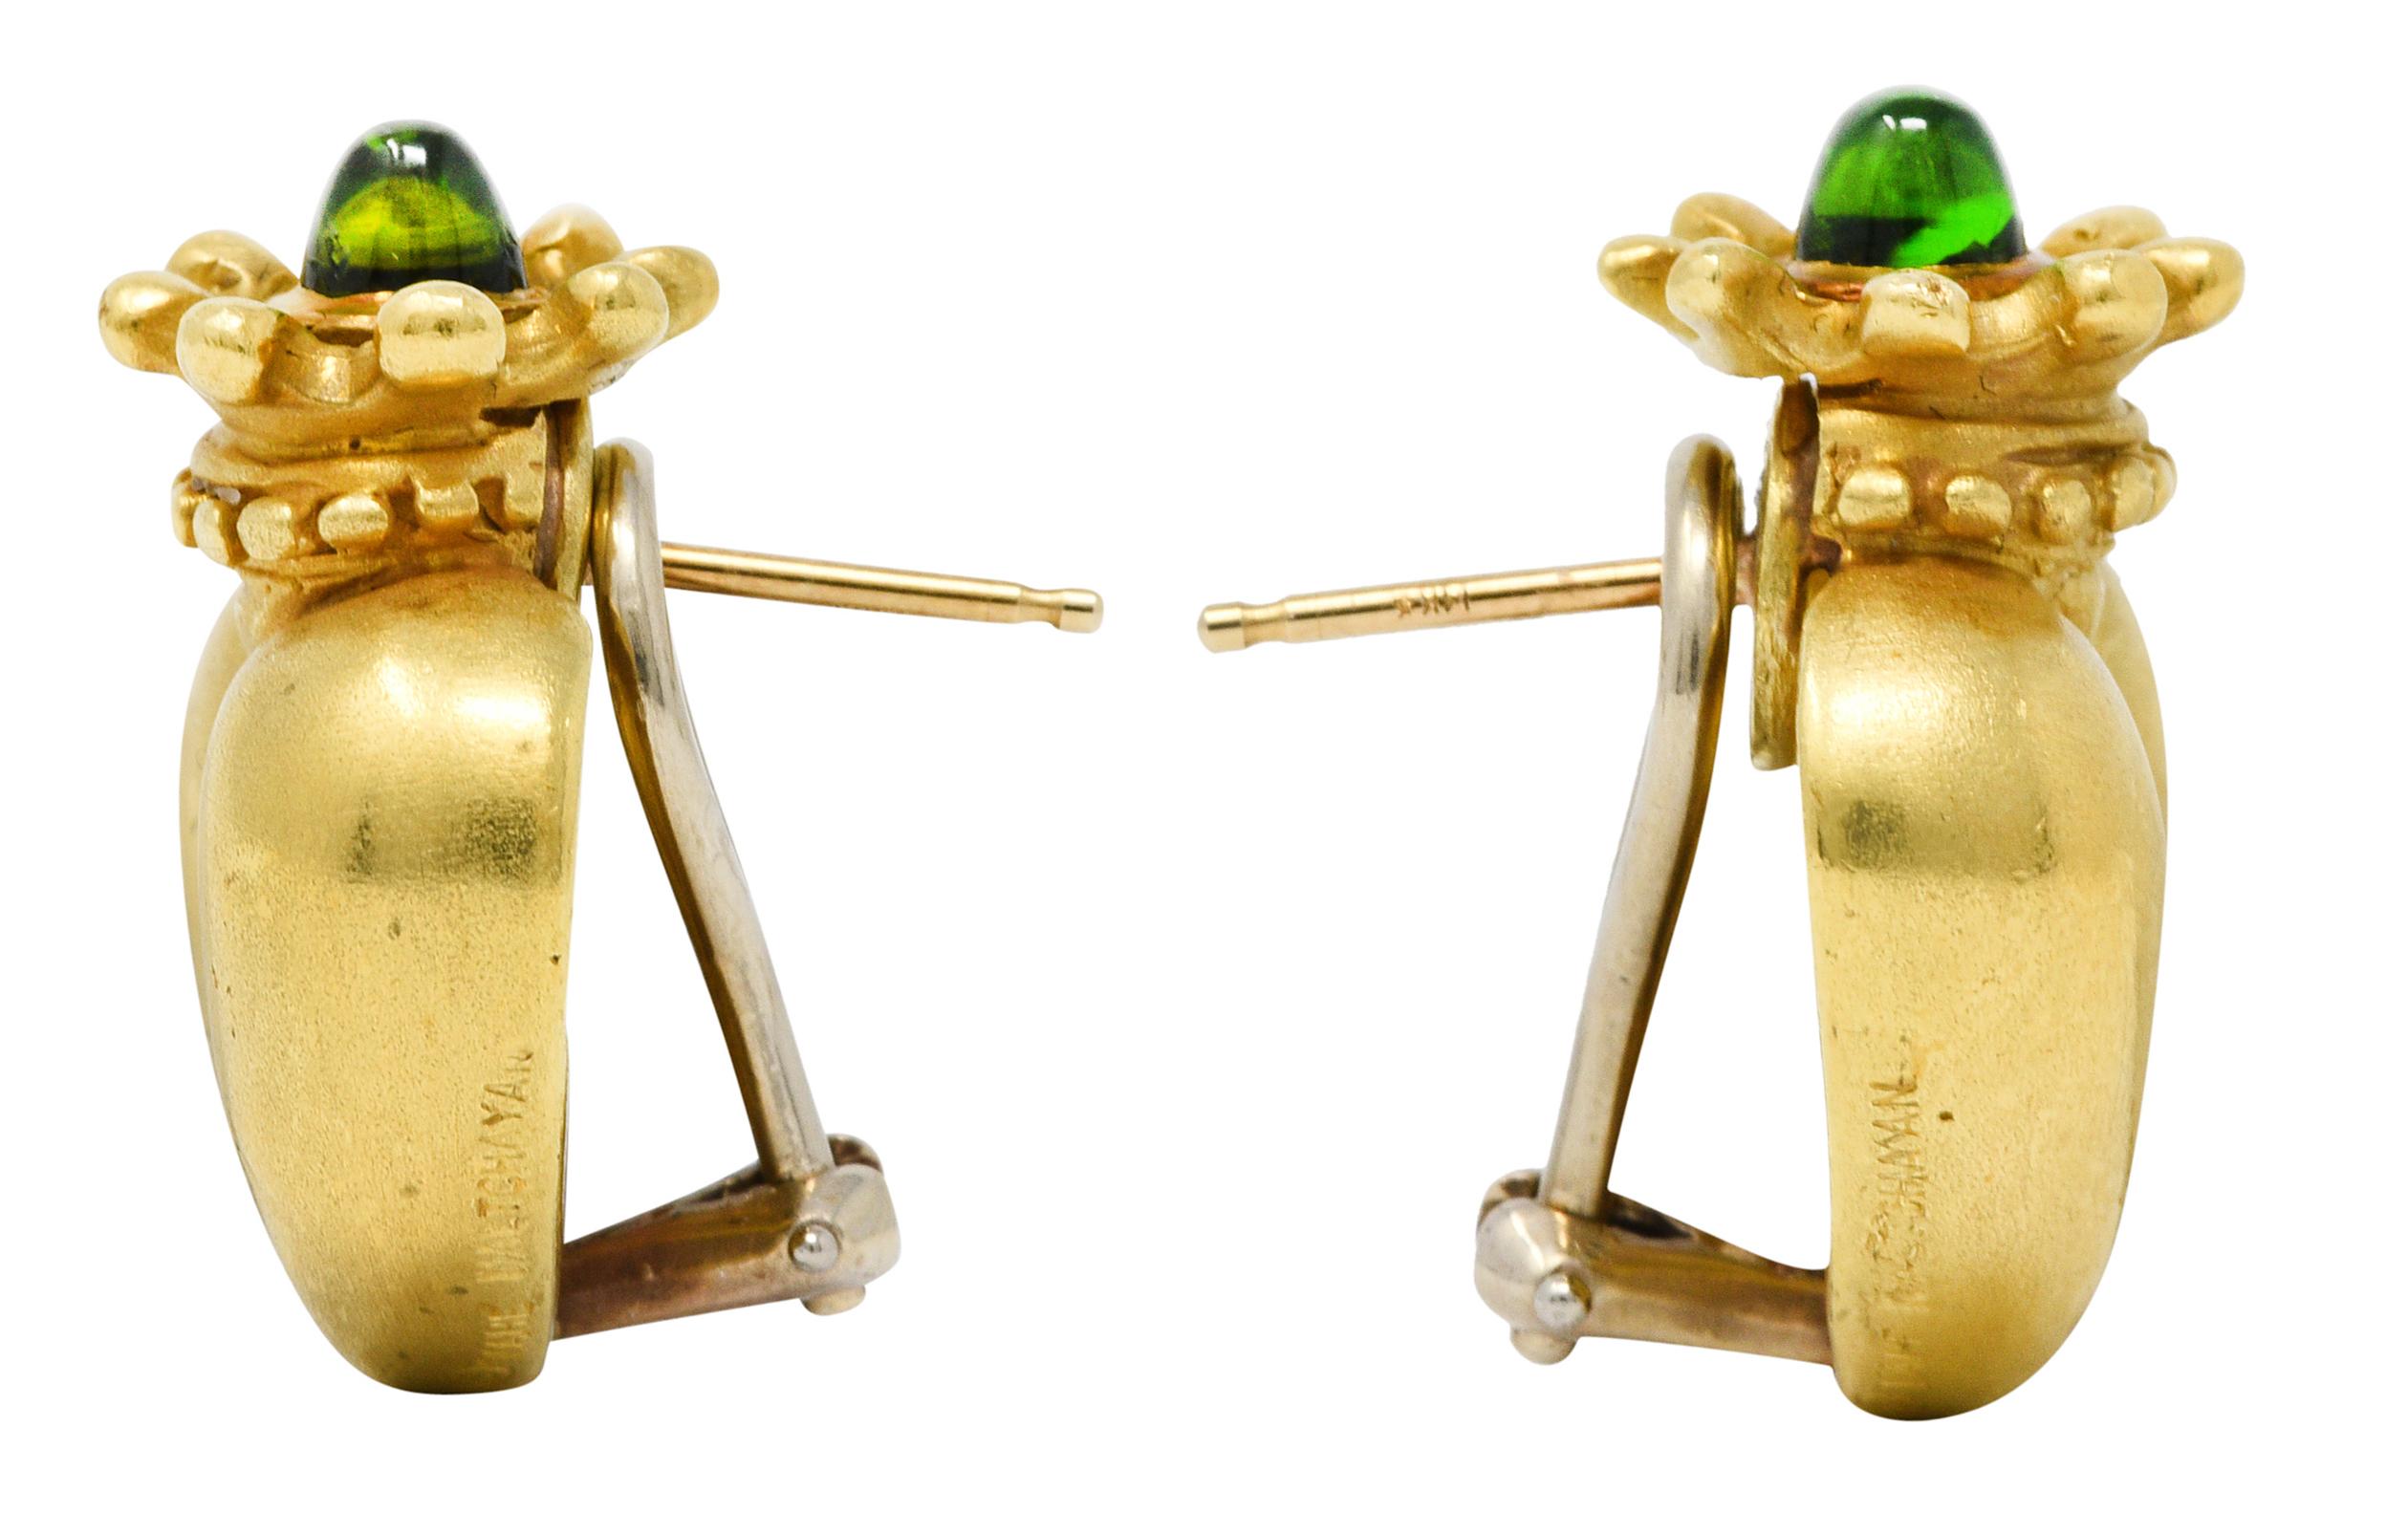 Earrings are designed as a stylized heart topped by a crown

Crown is gold beaded and features a bullet cabochon of green diopside

Completed by posts and hinged omega backs

Stamped 18K for 18 karat gold

Fully signed Vahe Naltchayan

Stamped for